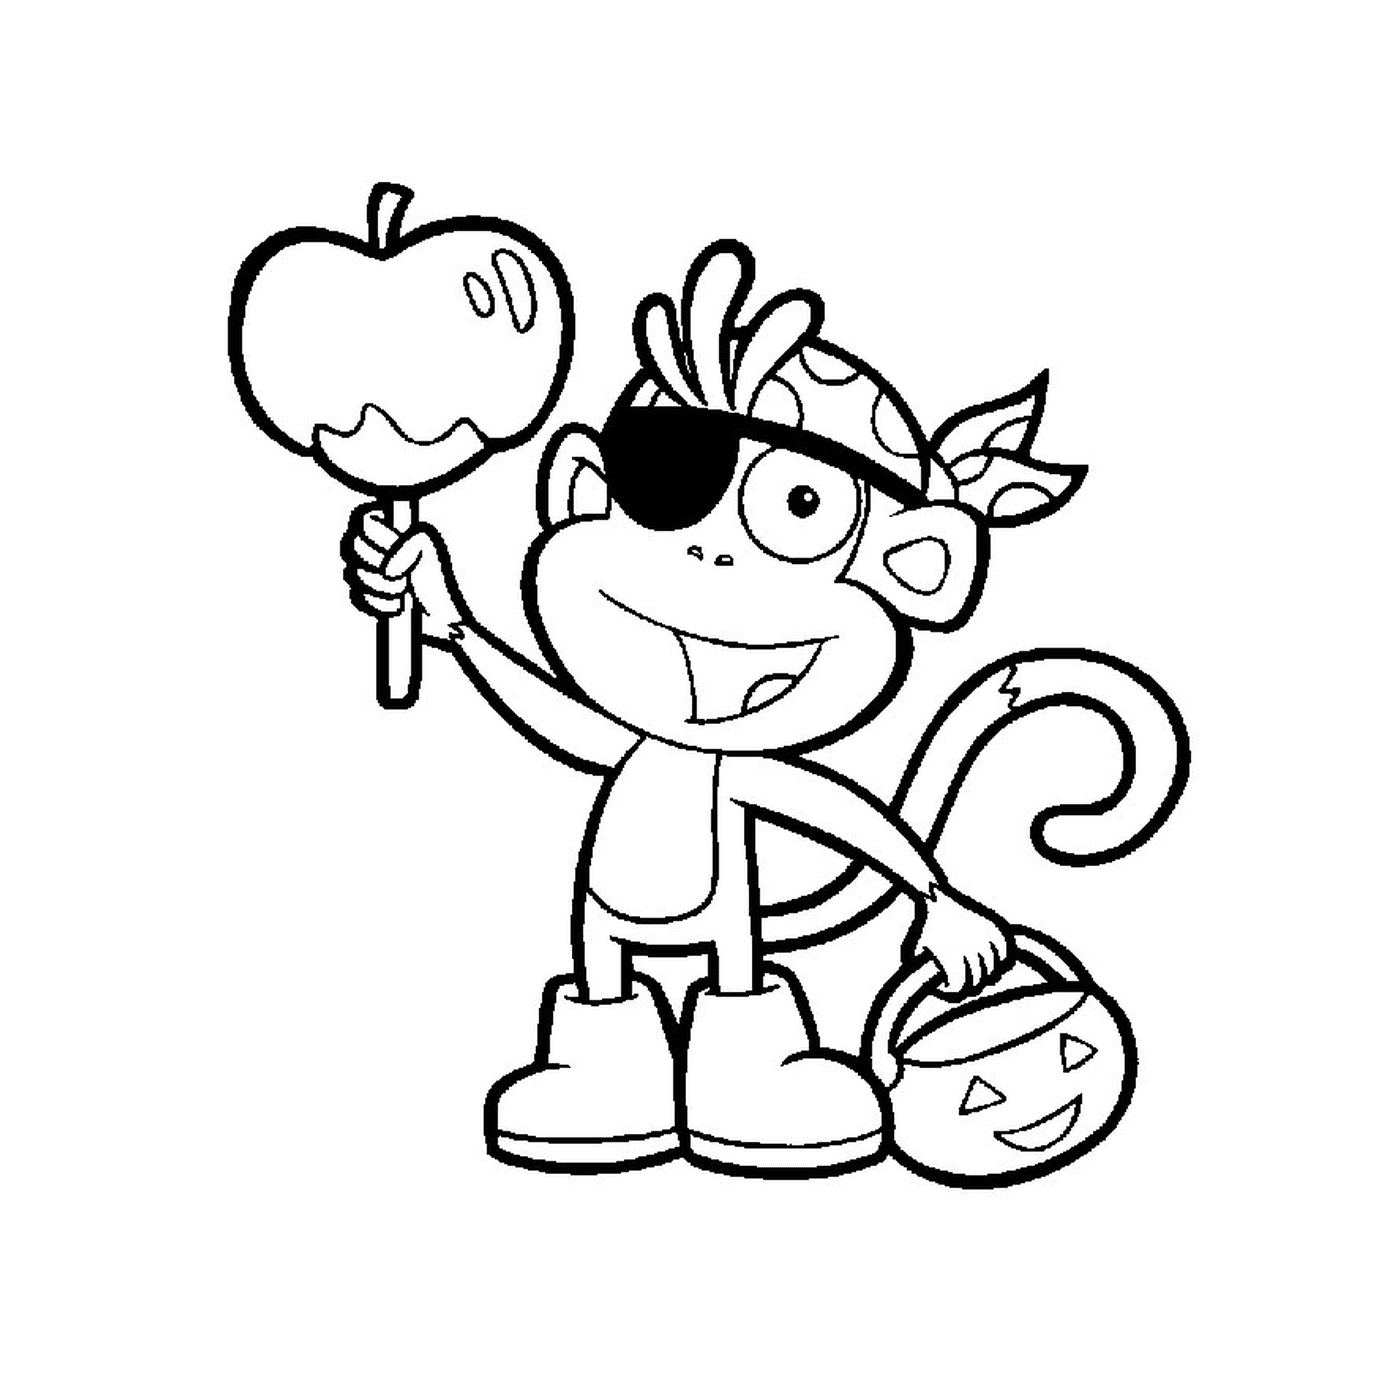  Babouche, the monkey, holds an apple 